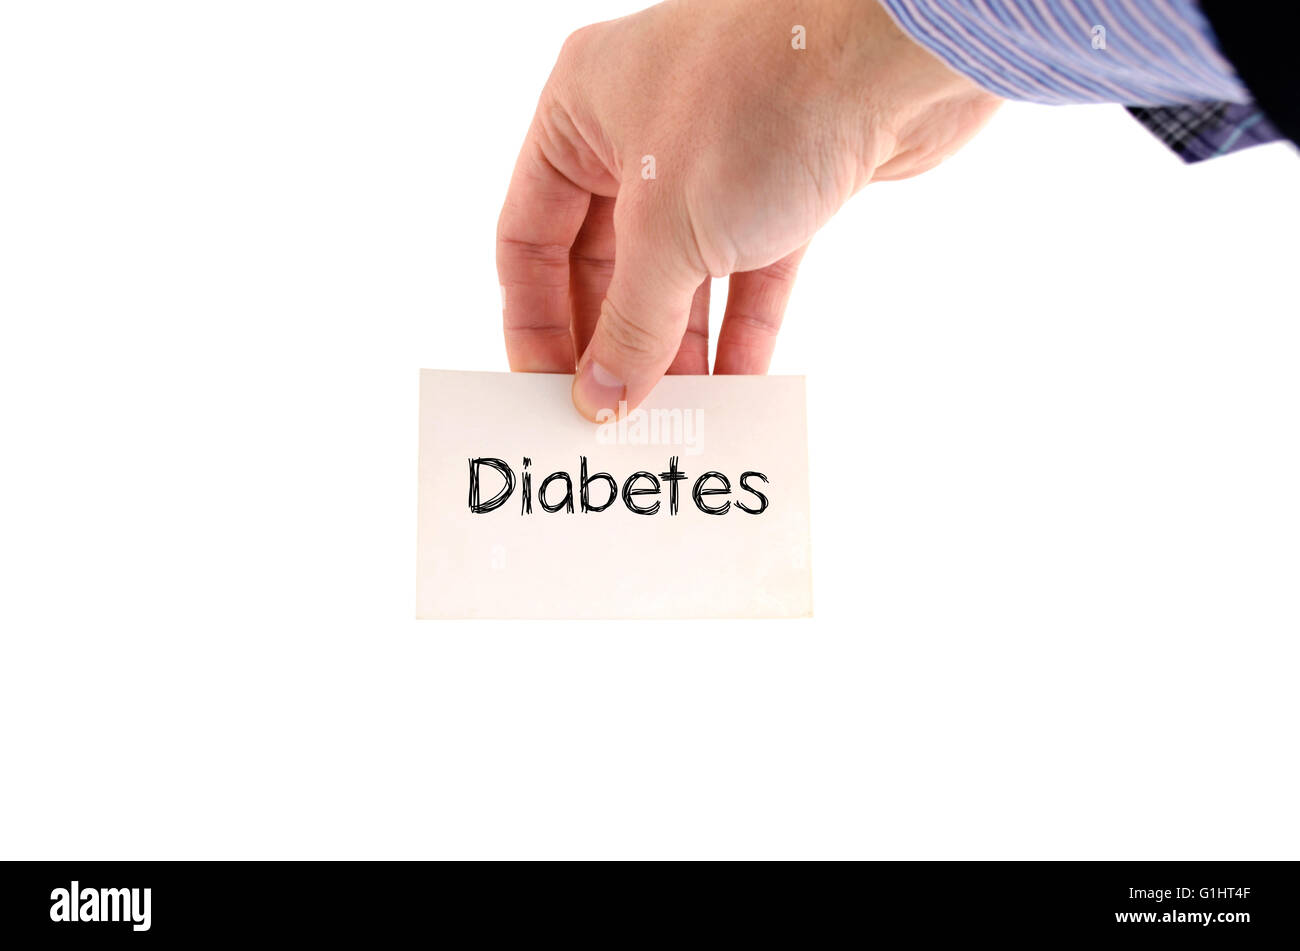 Diabetes text concept isolated over white background Stock Photo